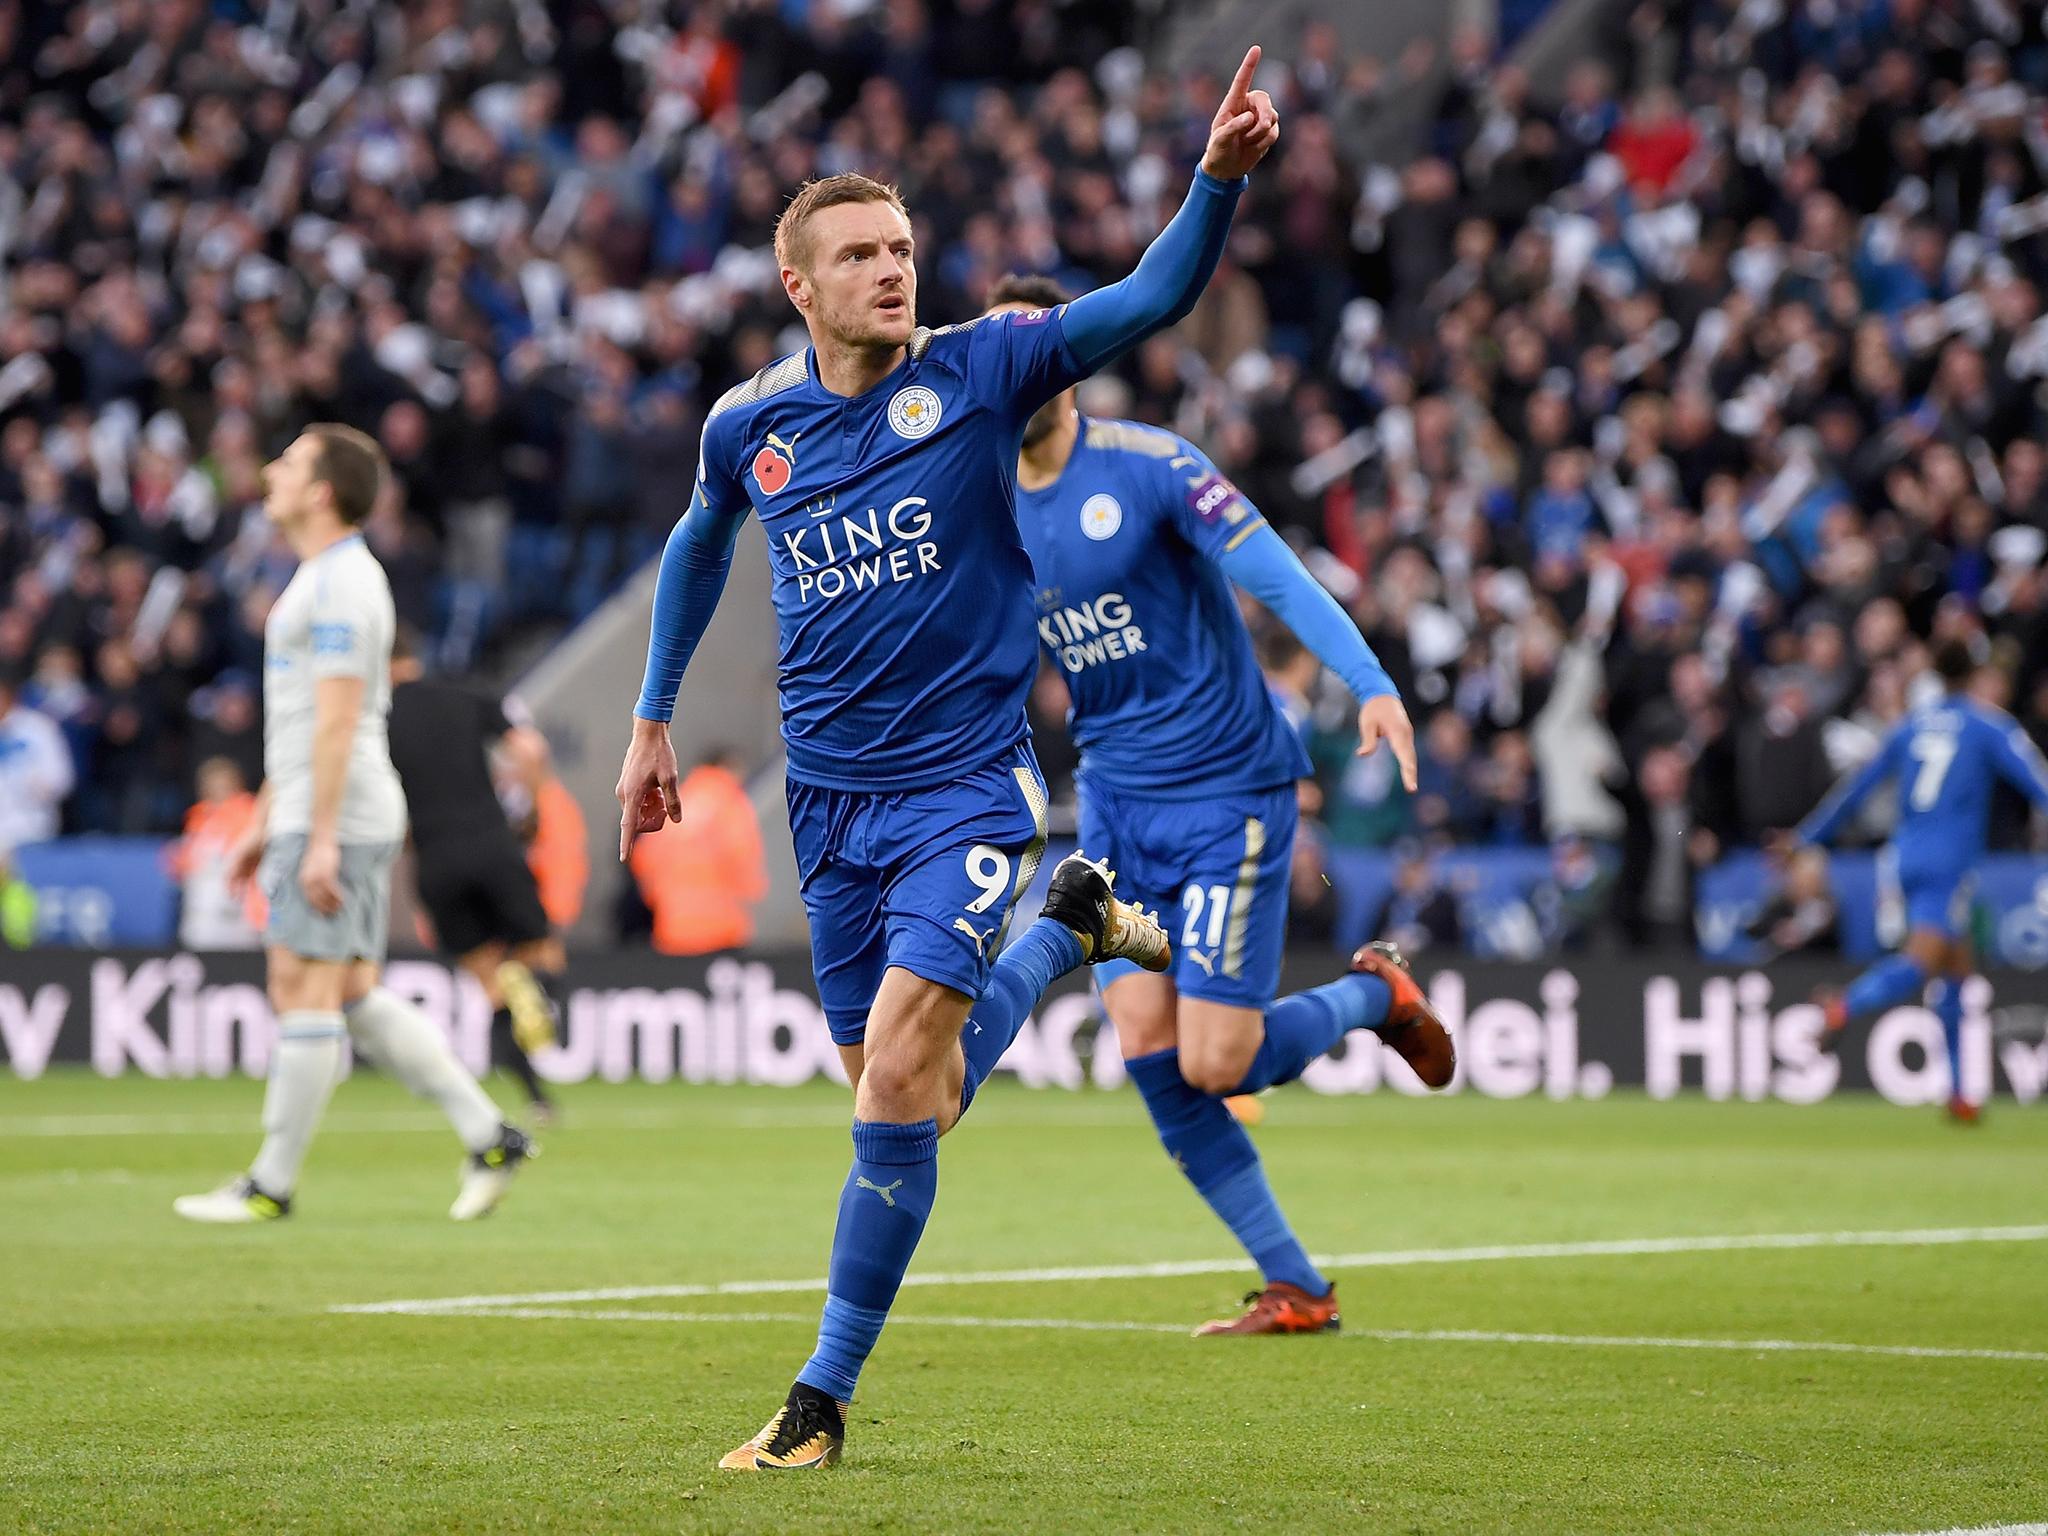 Jamie Vardy celebrates scoring the opening goal for Leicester City against Everton